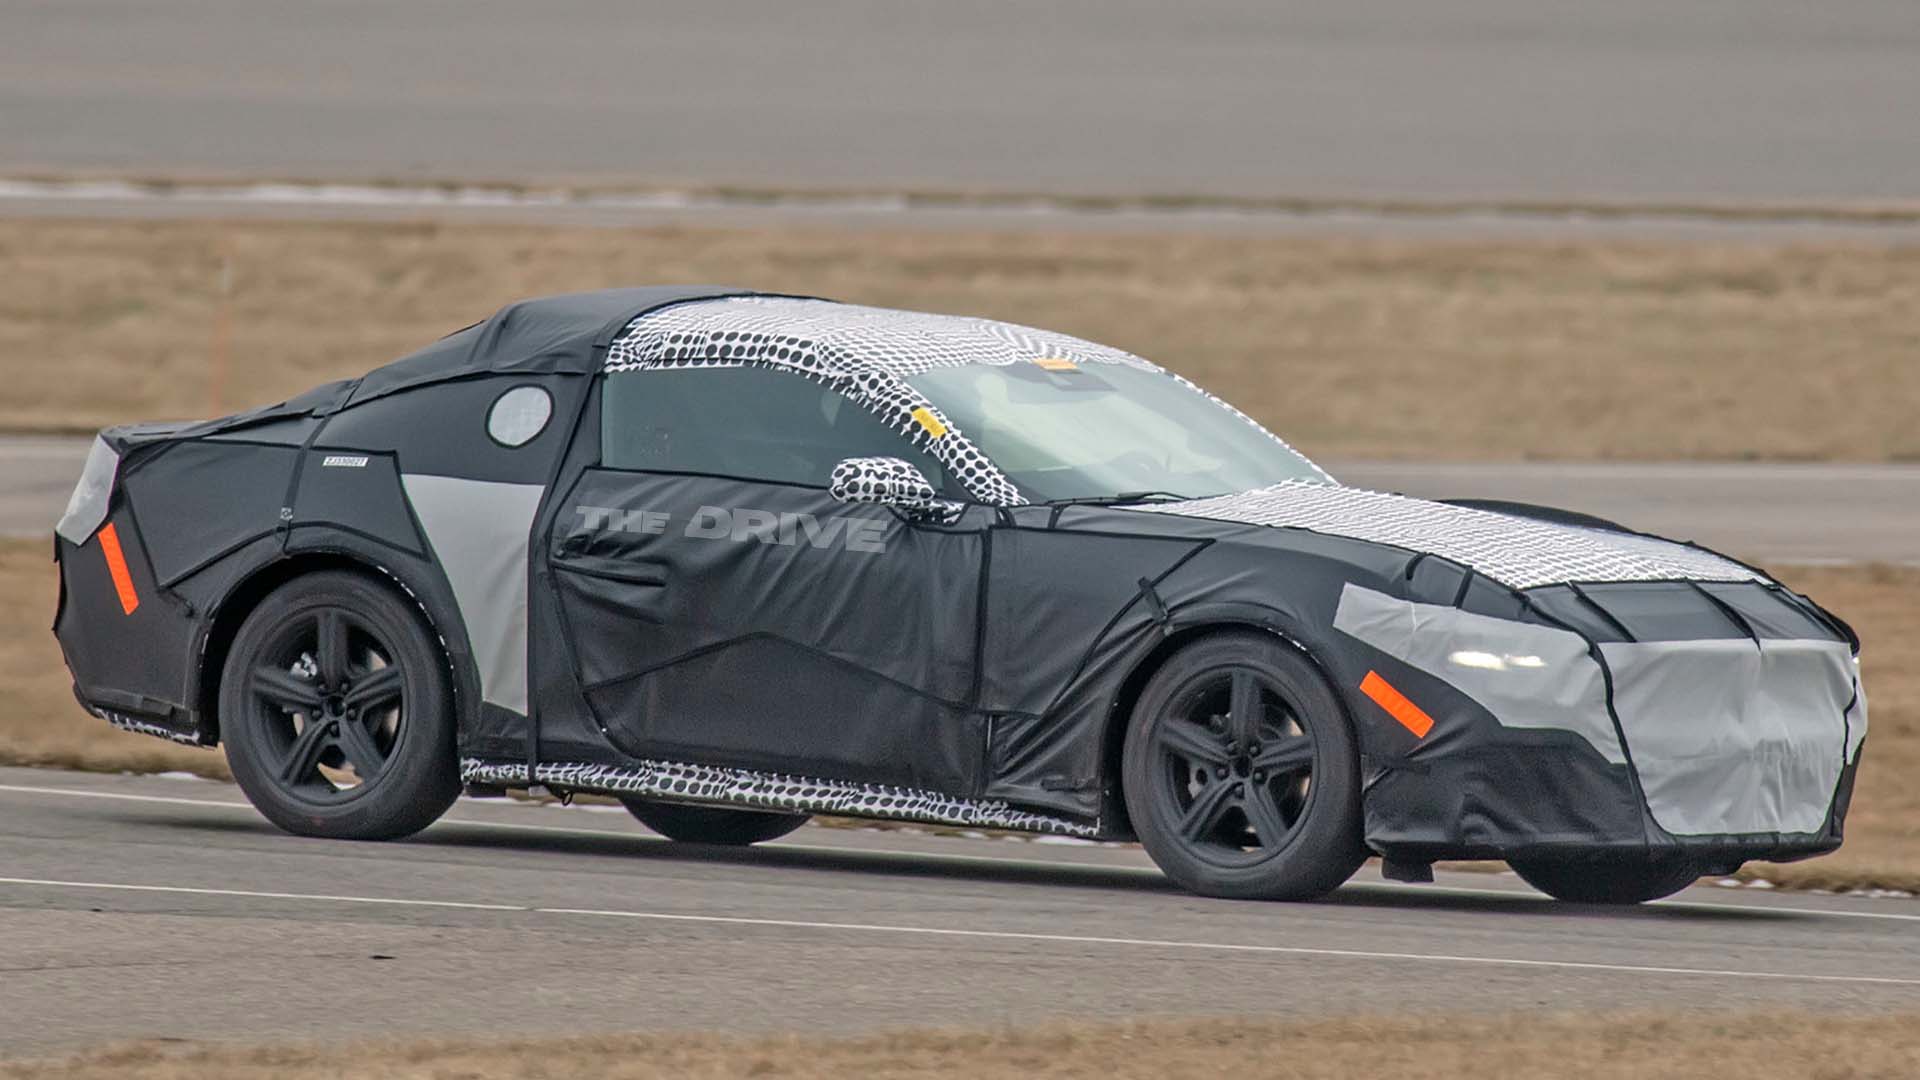 Next-Gen Ford Mustang S650: Here's Your First Look - The Drive